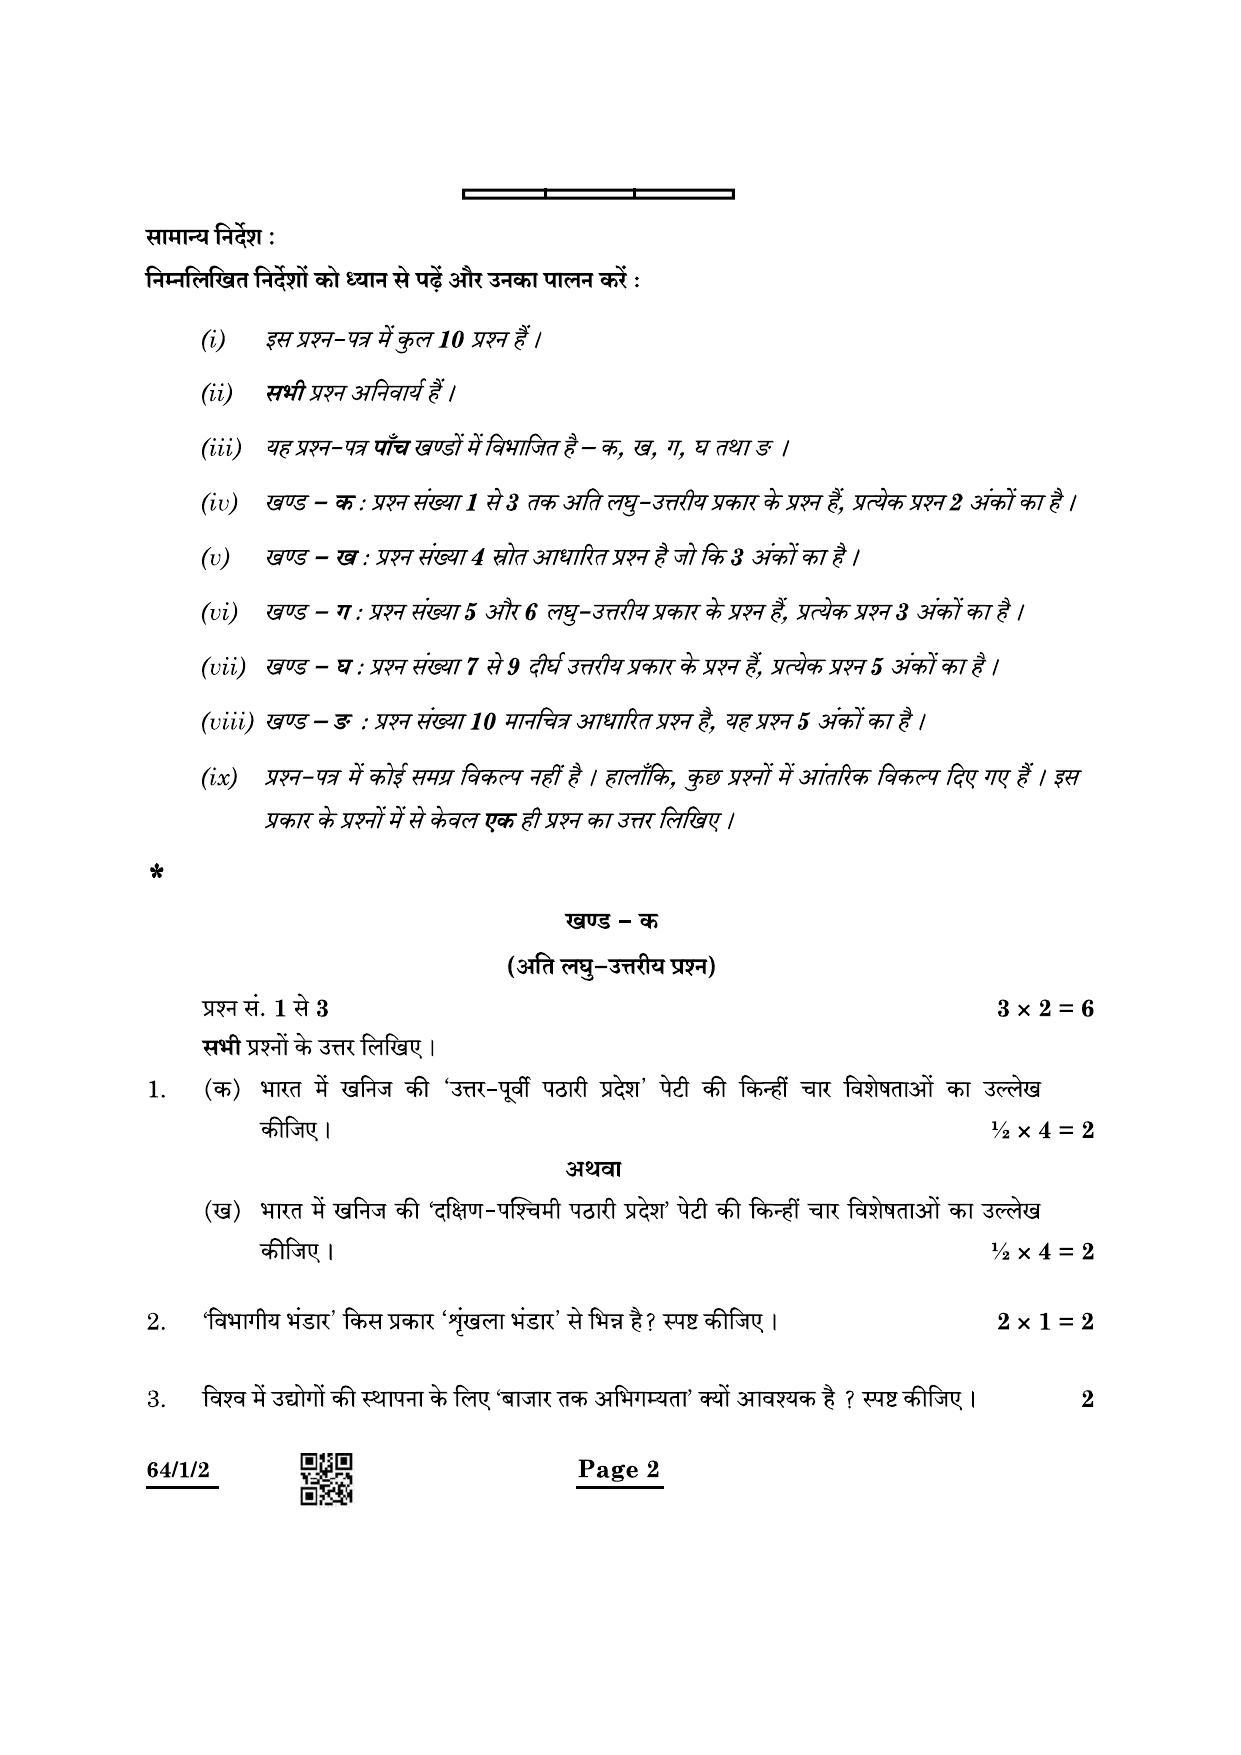 CBSE Class 12 64-1-2 Geography 2022 Question Paper - Page 2